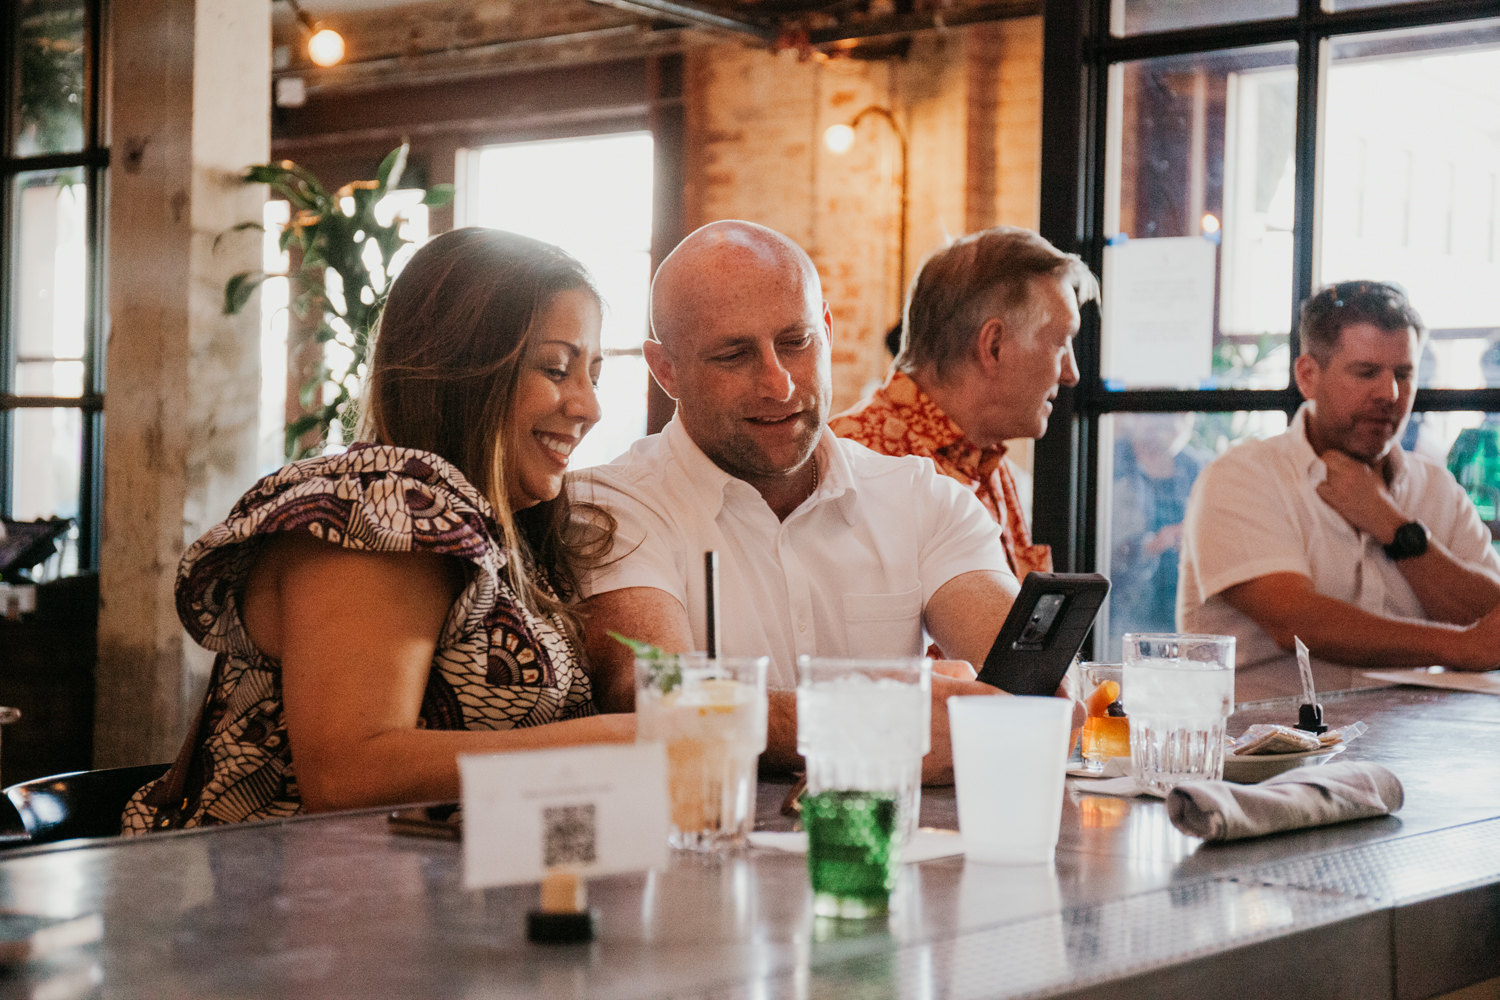 Image of a woman and man sitting at a bar, they're smiling and looking at a phone with drinks in front of them